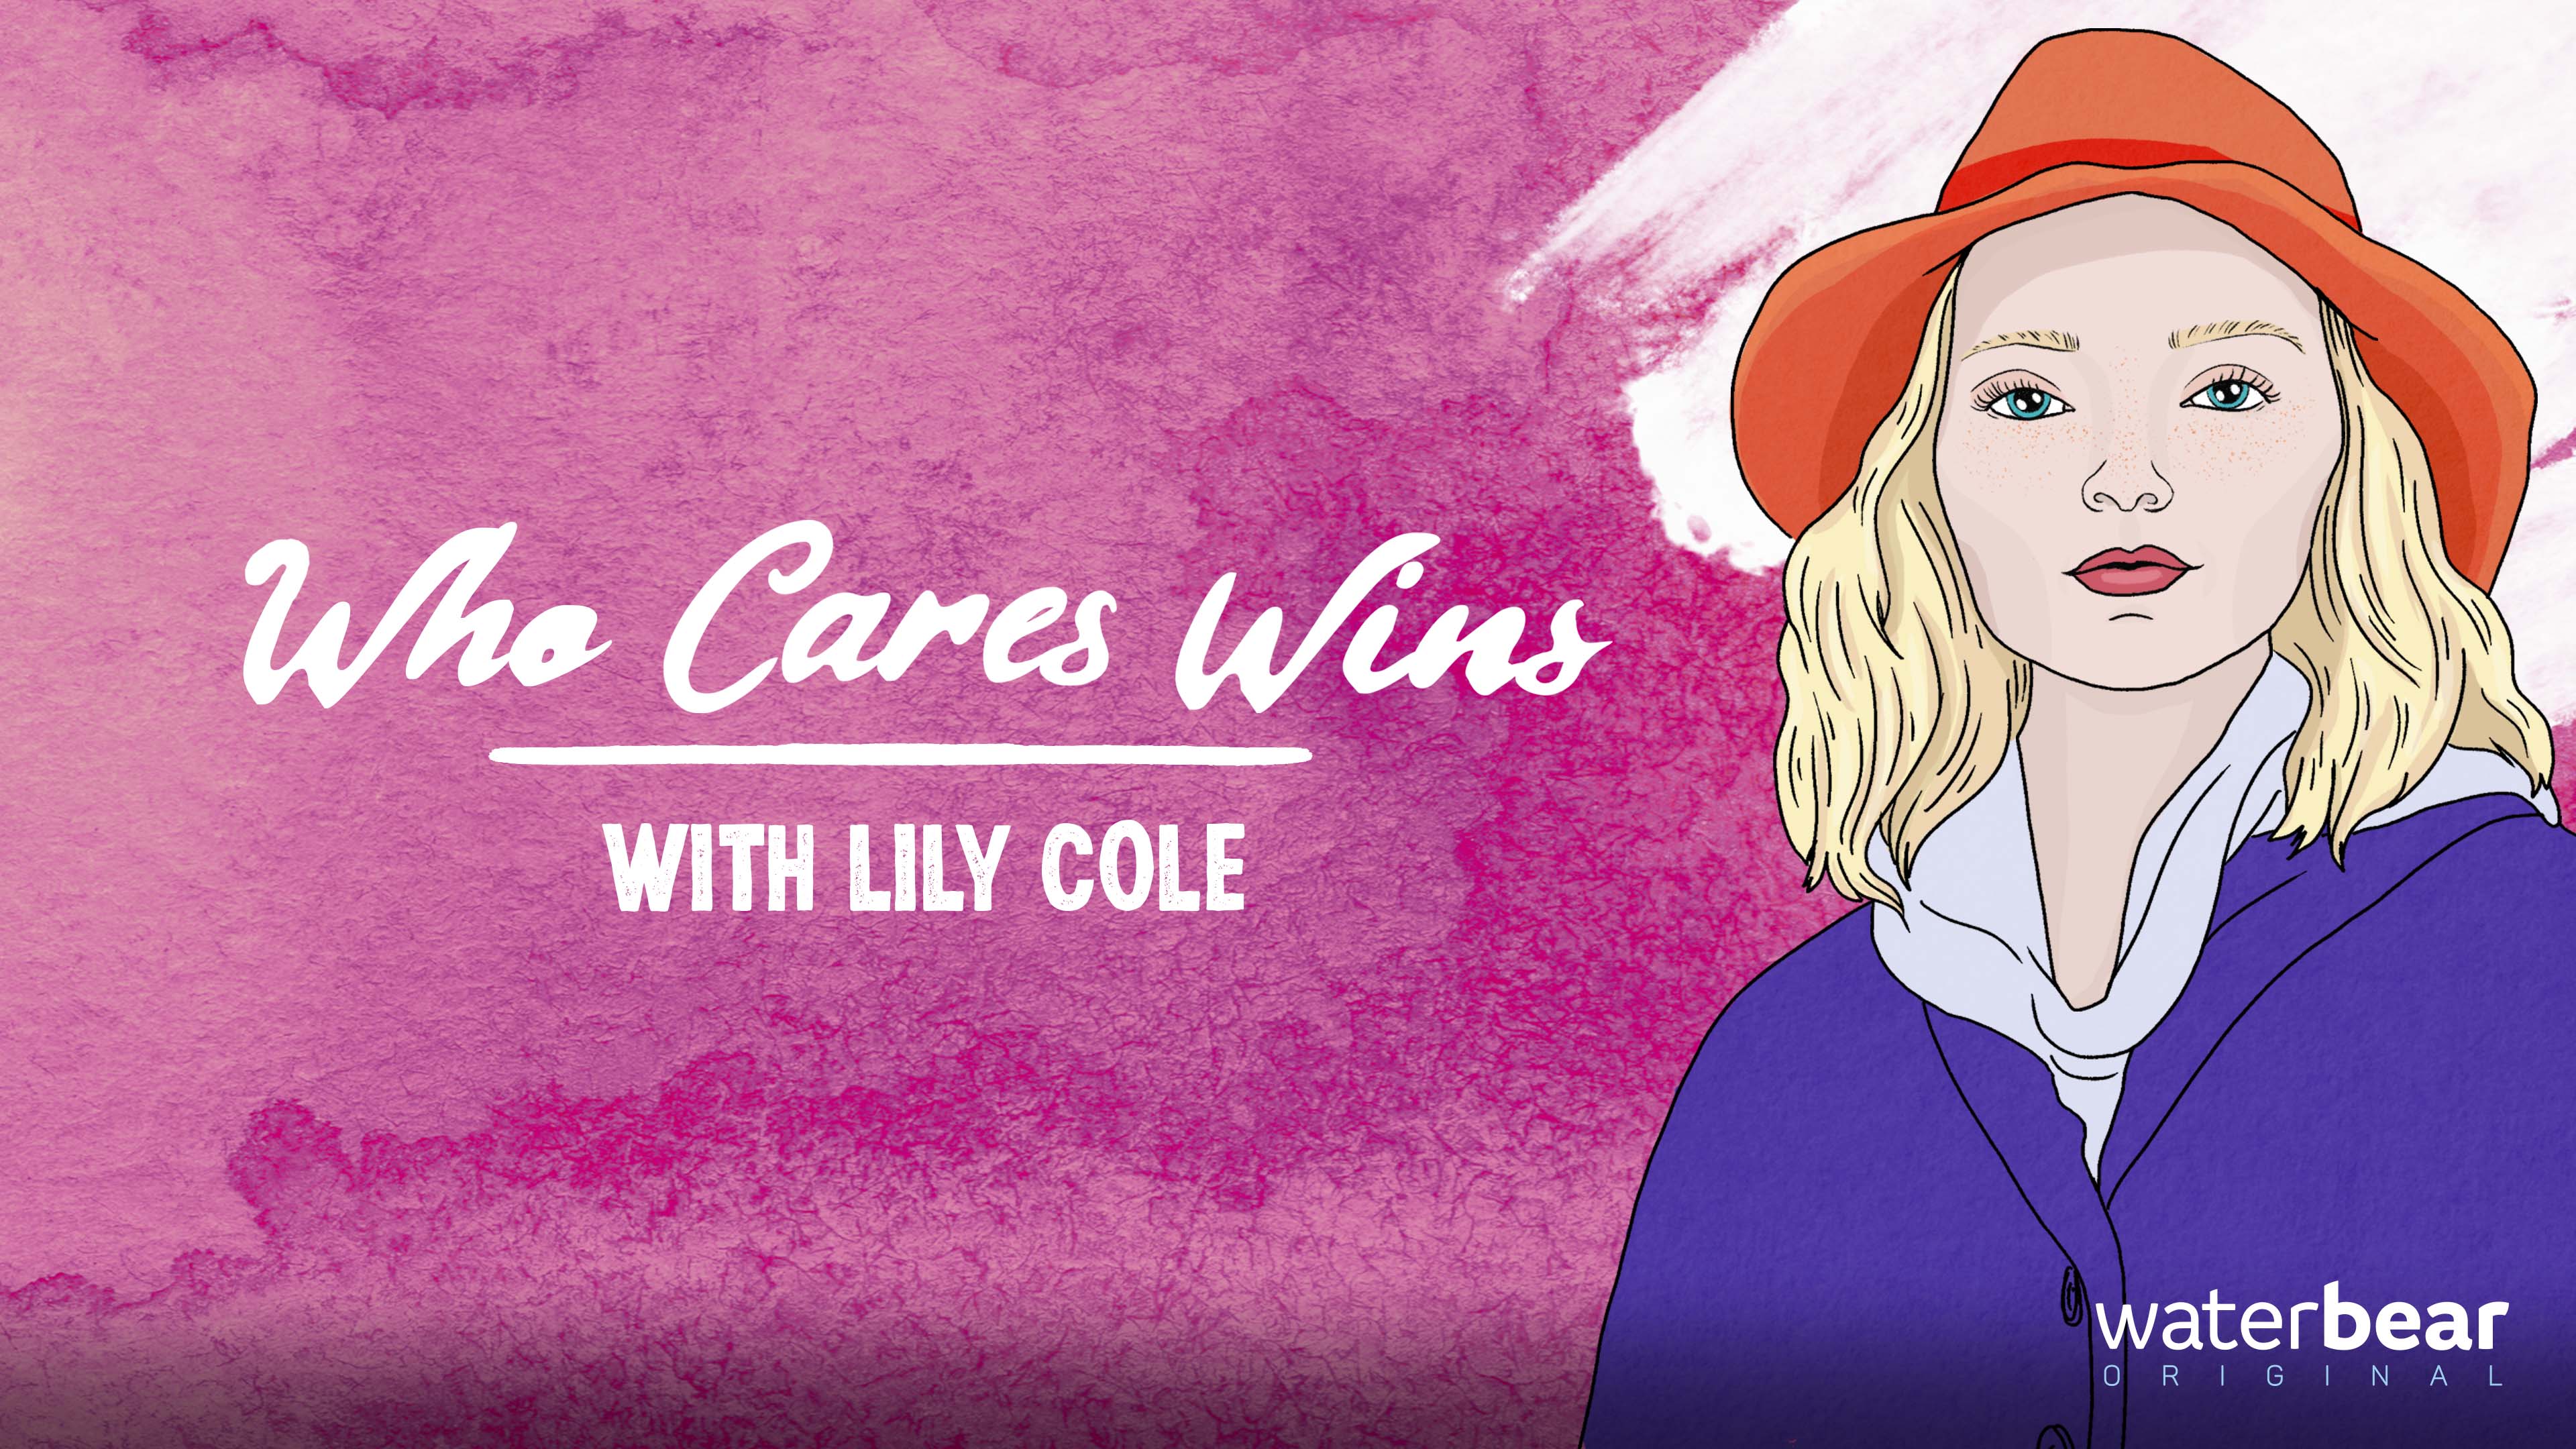 Who Cares Wins: with Lily Cole | WaterBear